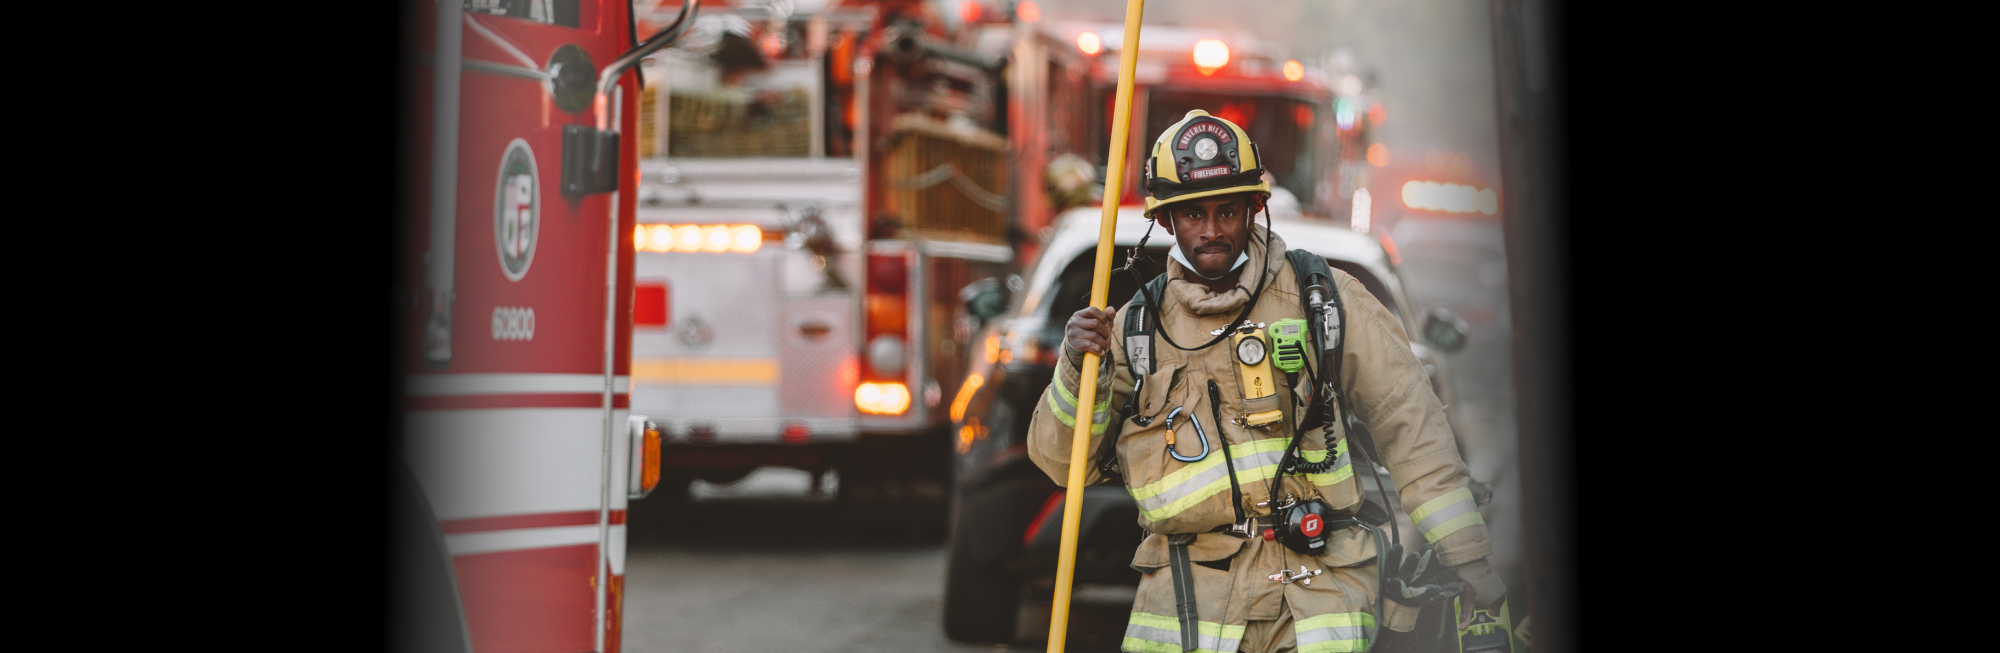 The importance of caller location and incident data for emergency response